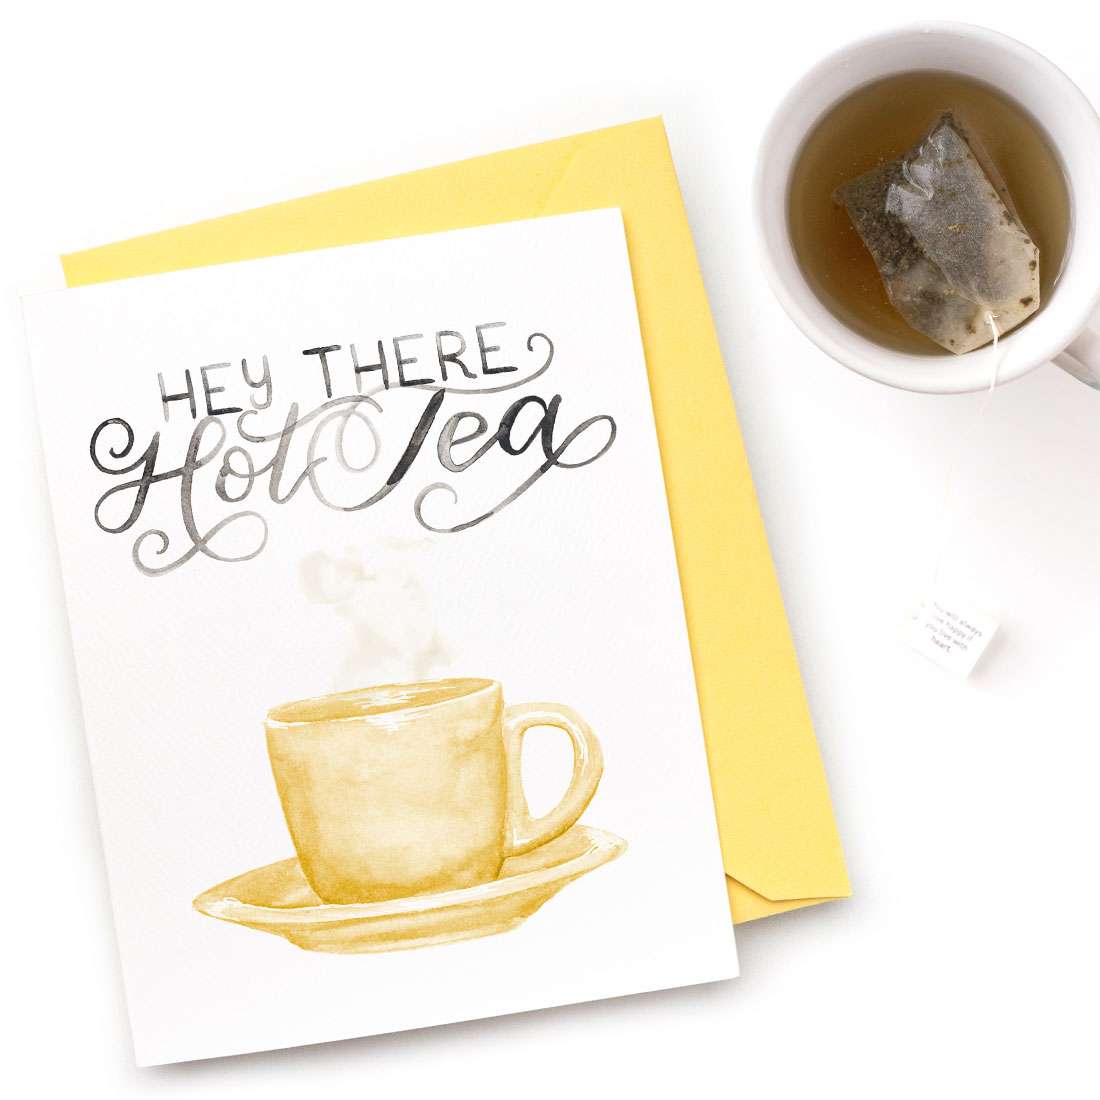 Hey There Hot Tea Card — Funny Love and Friendship Everyday Card |  Encouragement, Greeting Cards, Love & Friendship by CharmCat